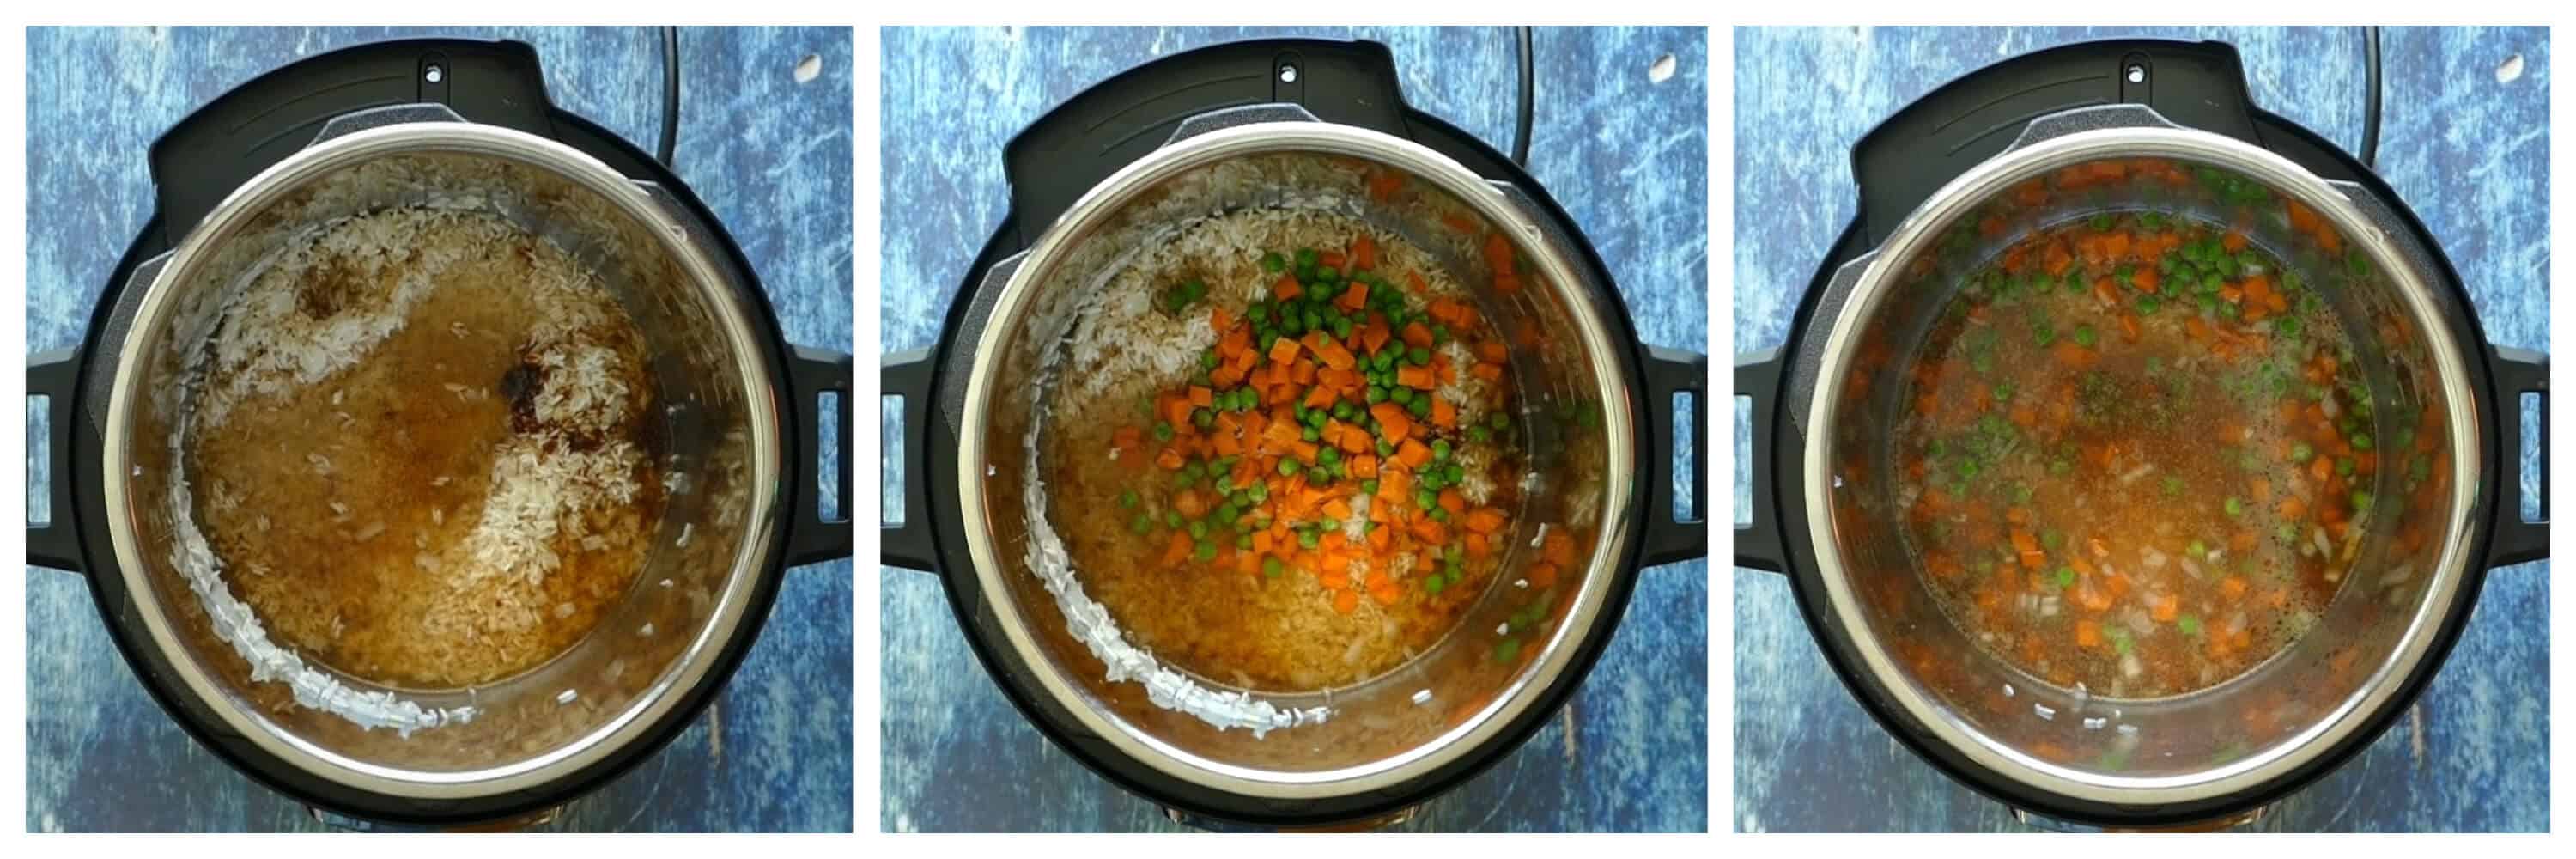 Instant Pot Fried Rice Instructions 2 collage - rice, sauce ingredients, vegetables added, stirred - Paint the Kitchen Red